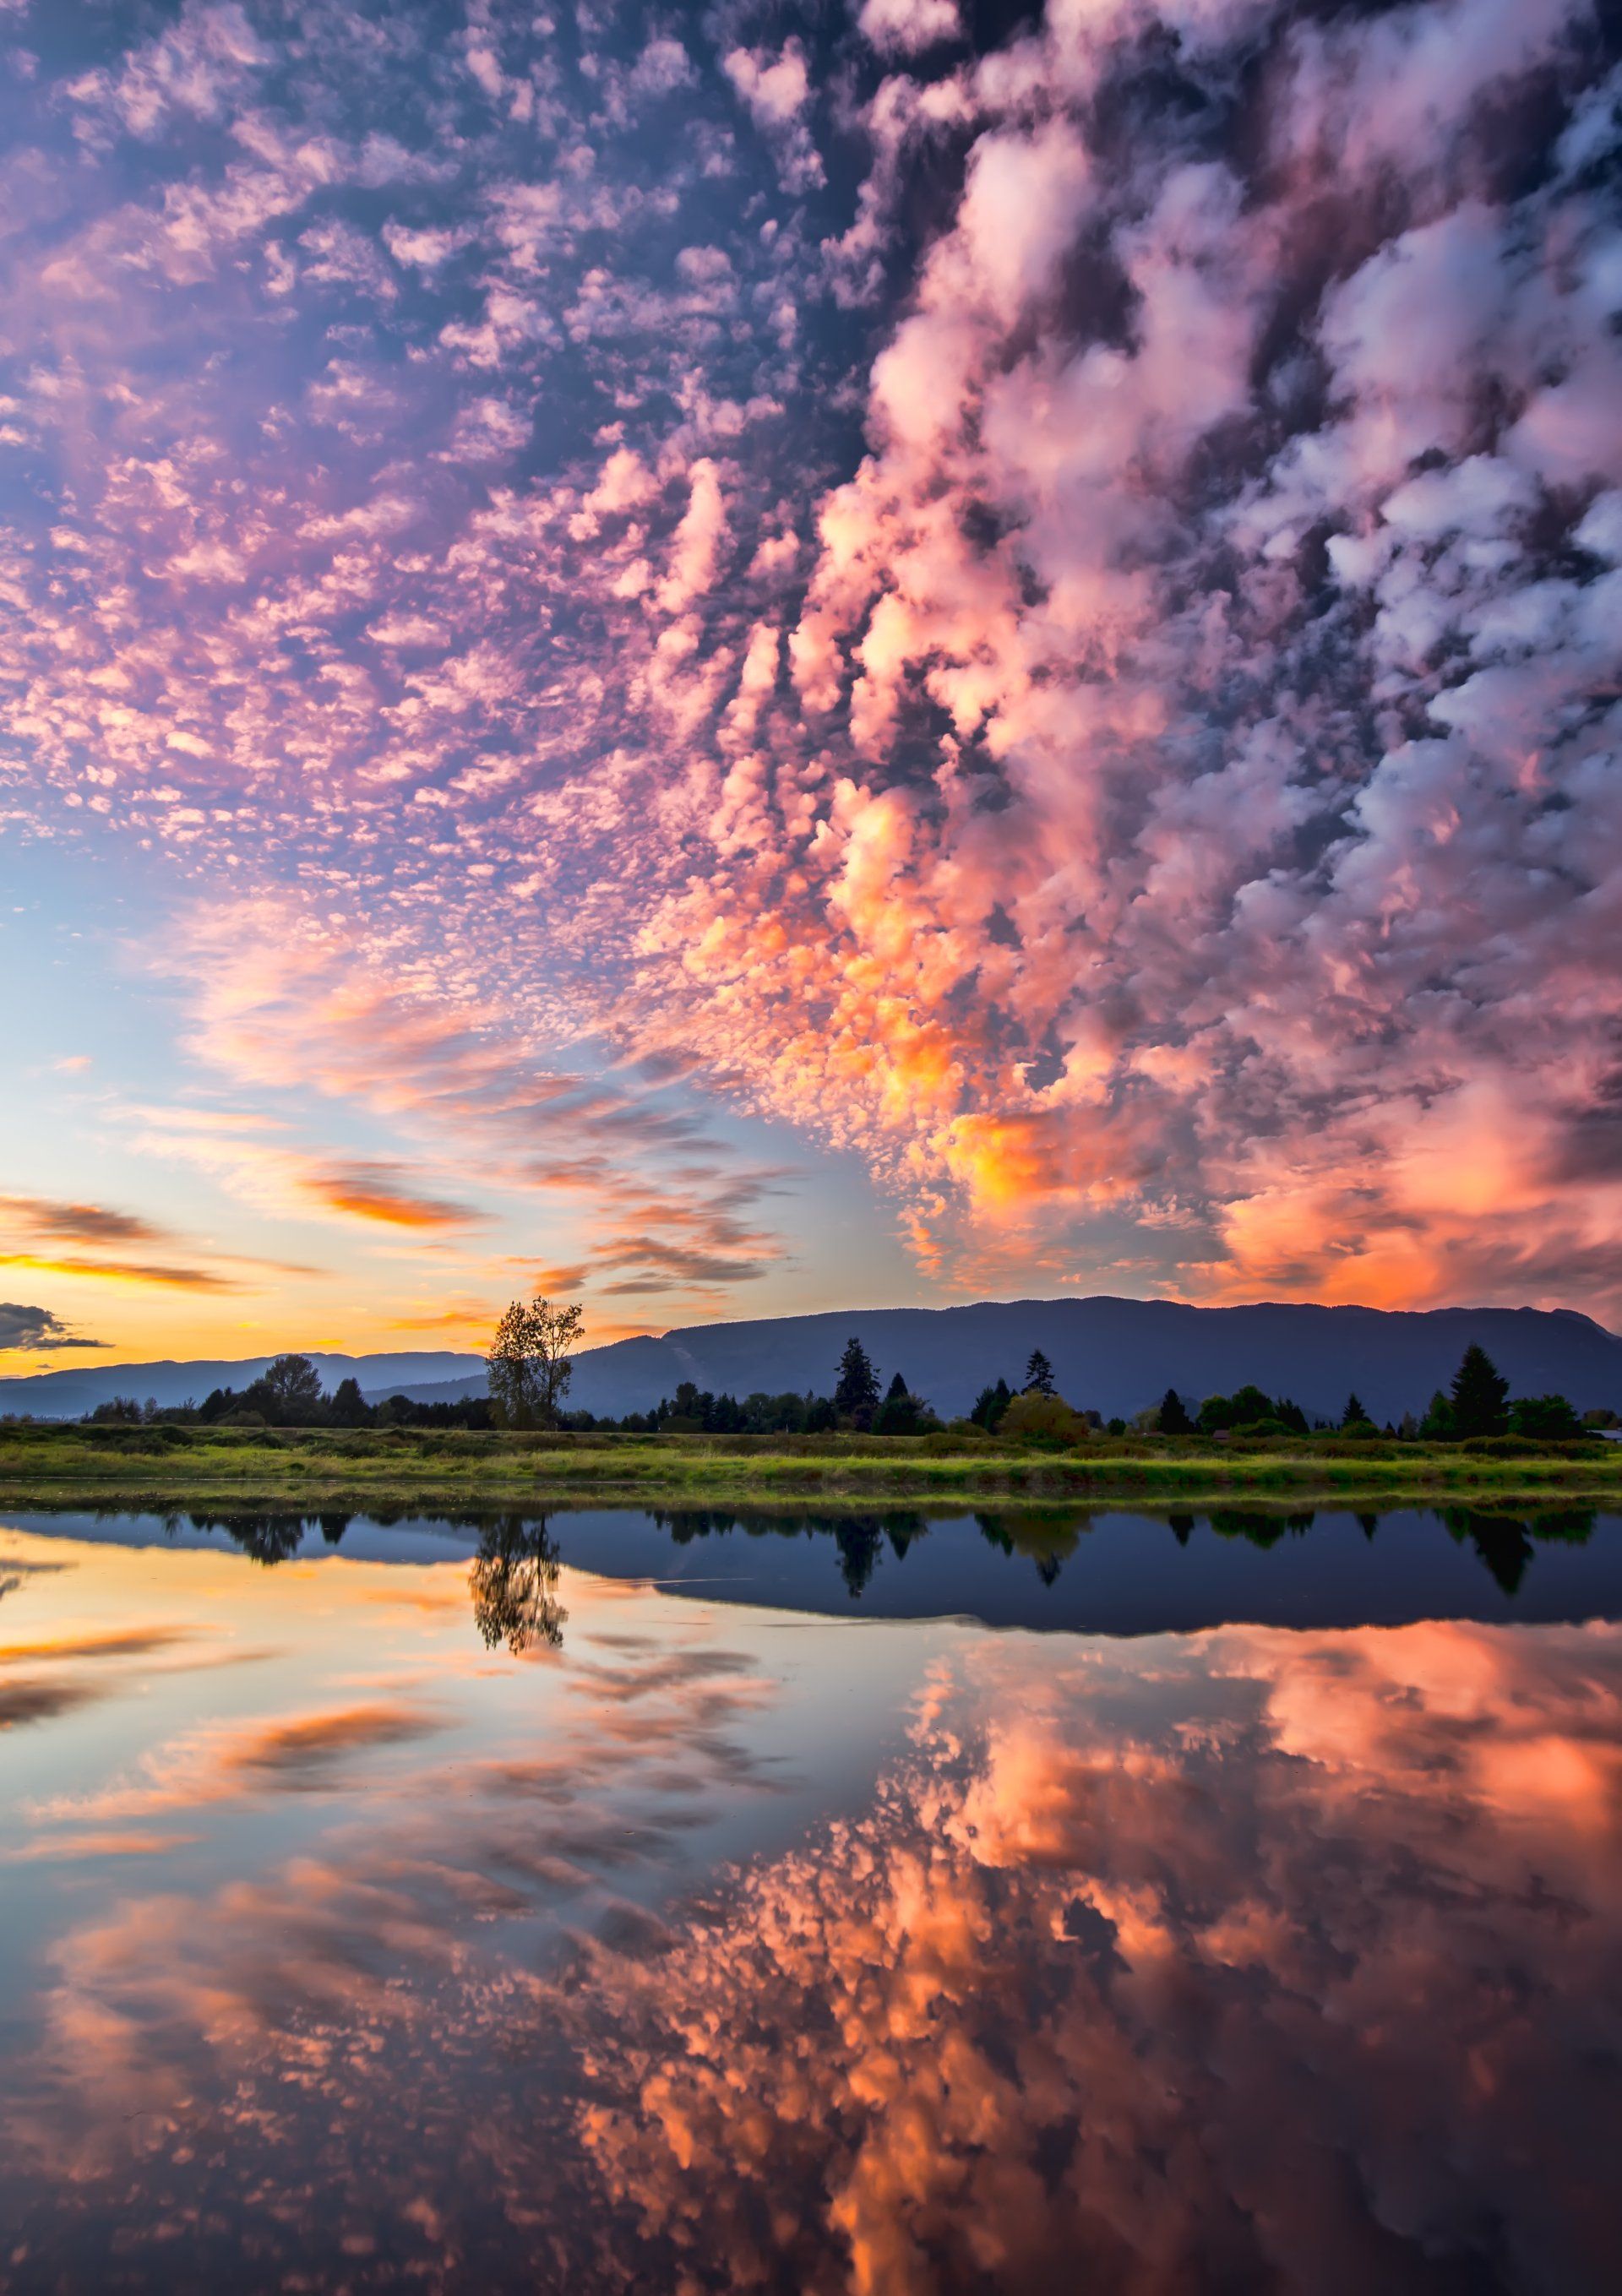 a sunset over a lake with mountains in the background and clouds reflected in the water .